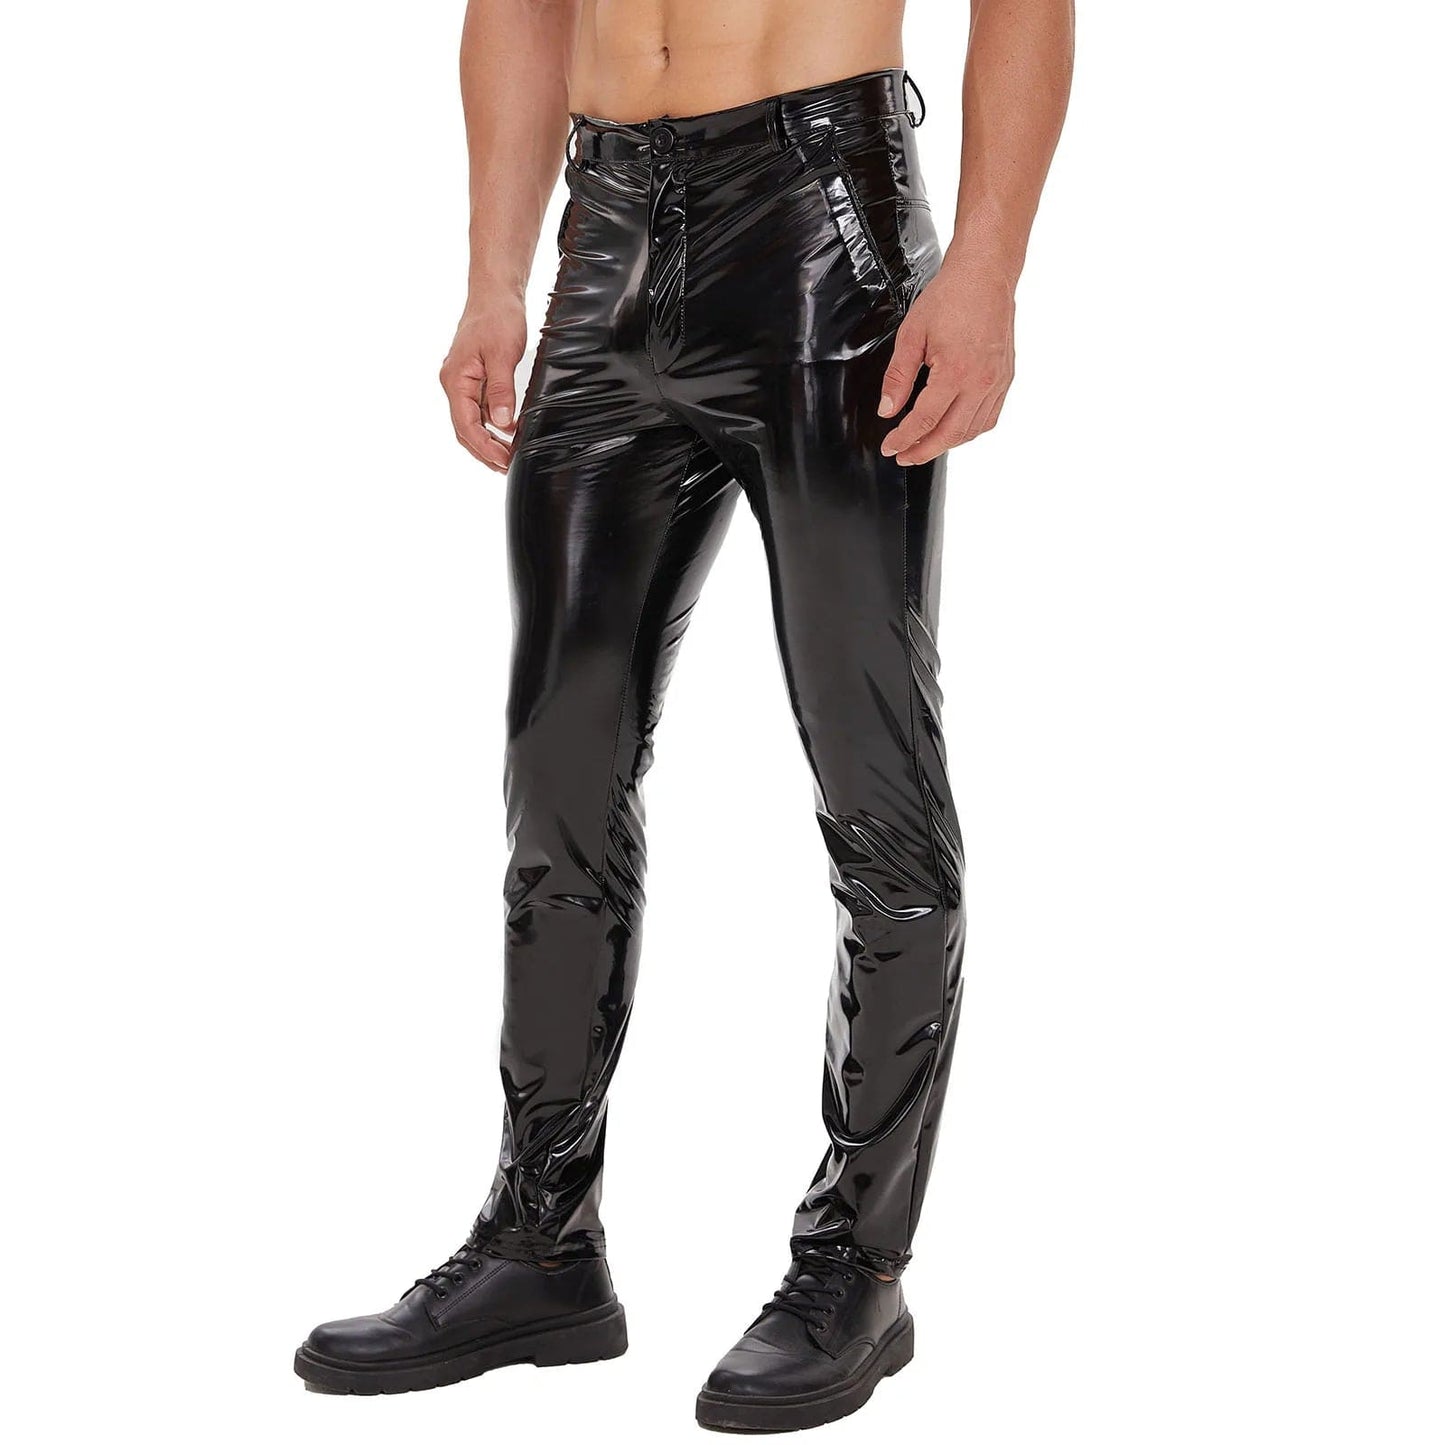 Mens Shiny Leather Straight Pants Sexy Zipper Open Crotch Glossy PVC Leather Casual Trousers Male Shaping Wetlook Latex Leggings